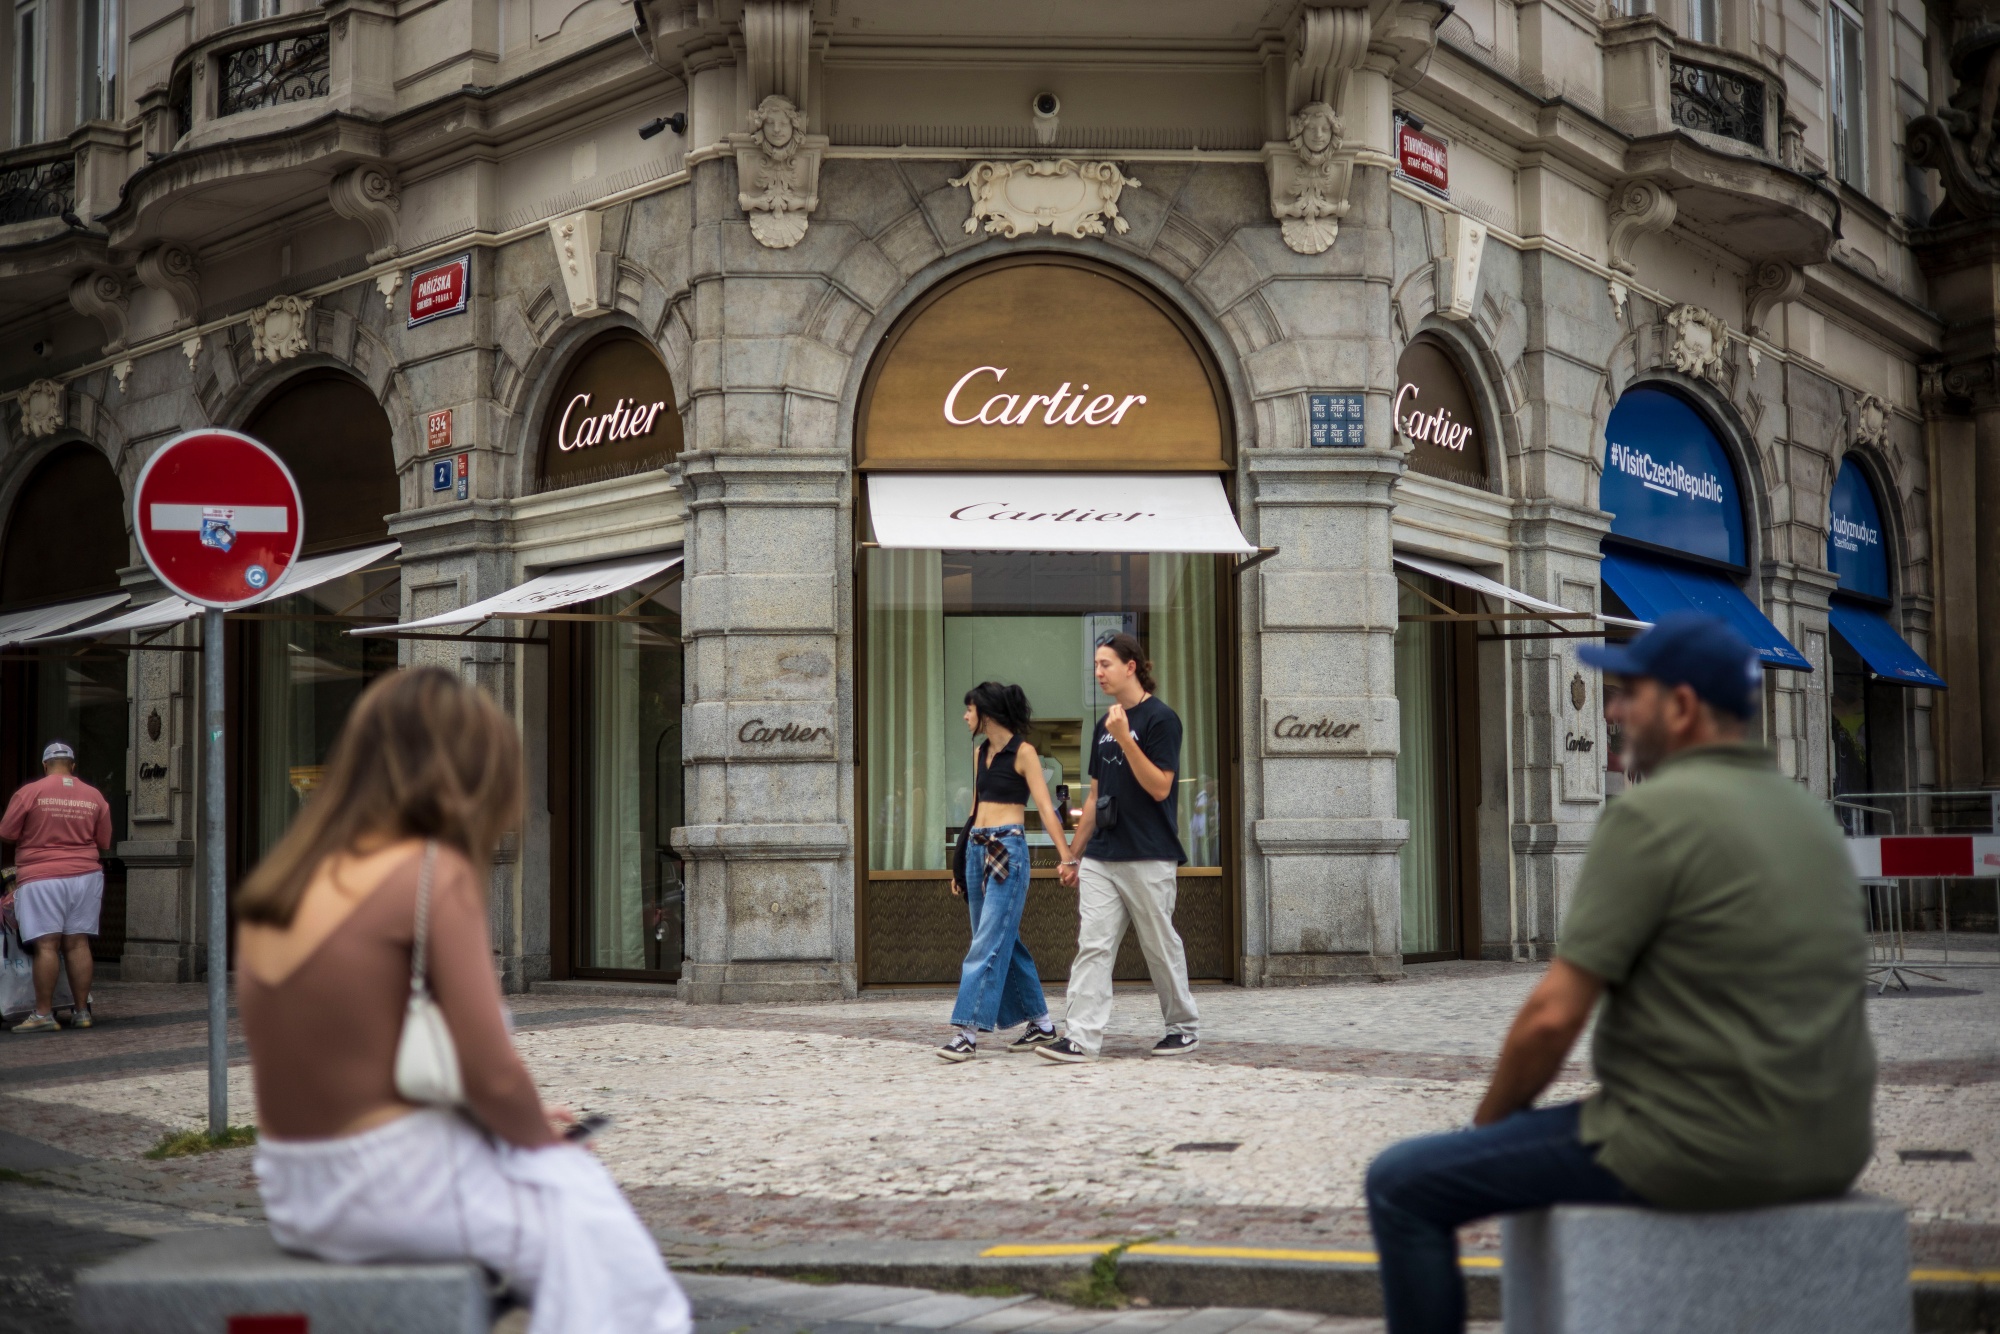 Kering, Cartier launch environmental pact for watches, jewellery